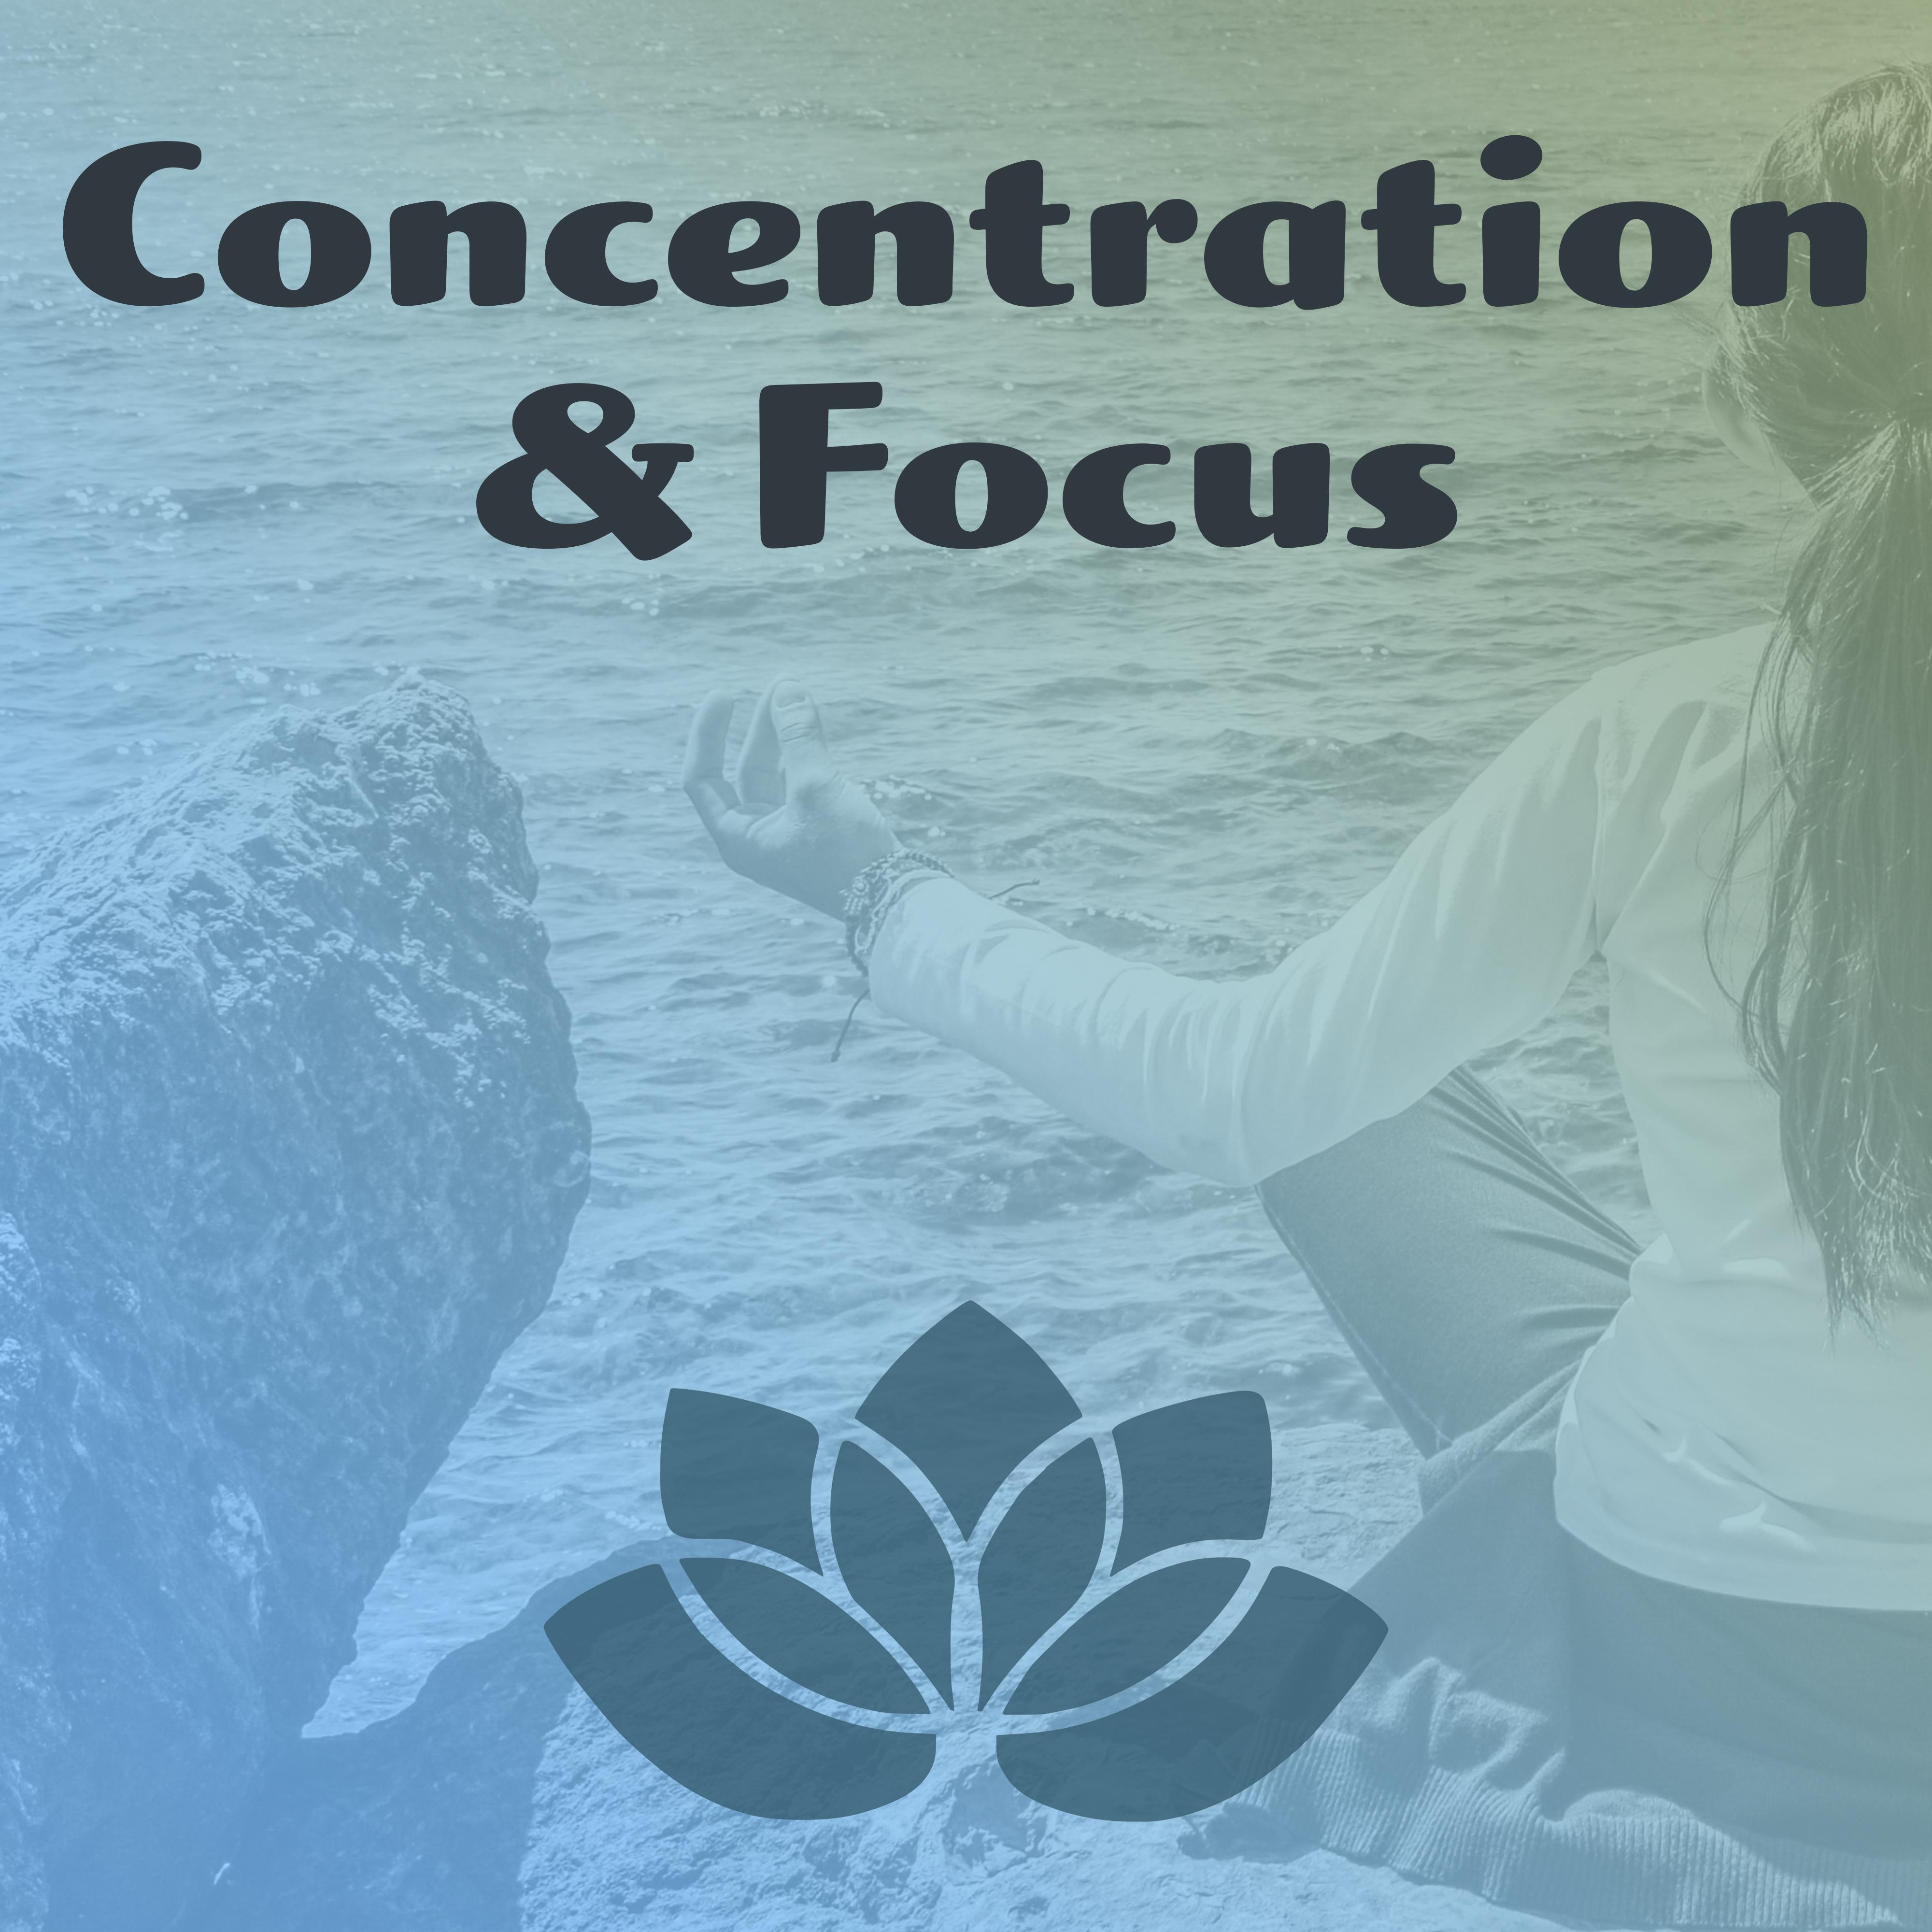 Concentration  Focus  Meditation Music, Yoga Sounds, Pure Mind, Reiki, Calmness, Nature Sounds for Relaxation